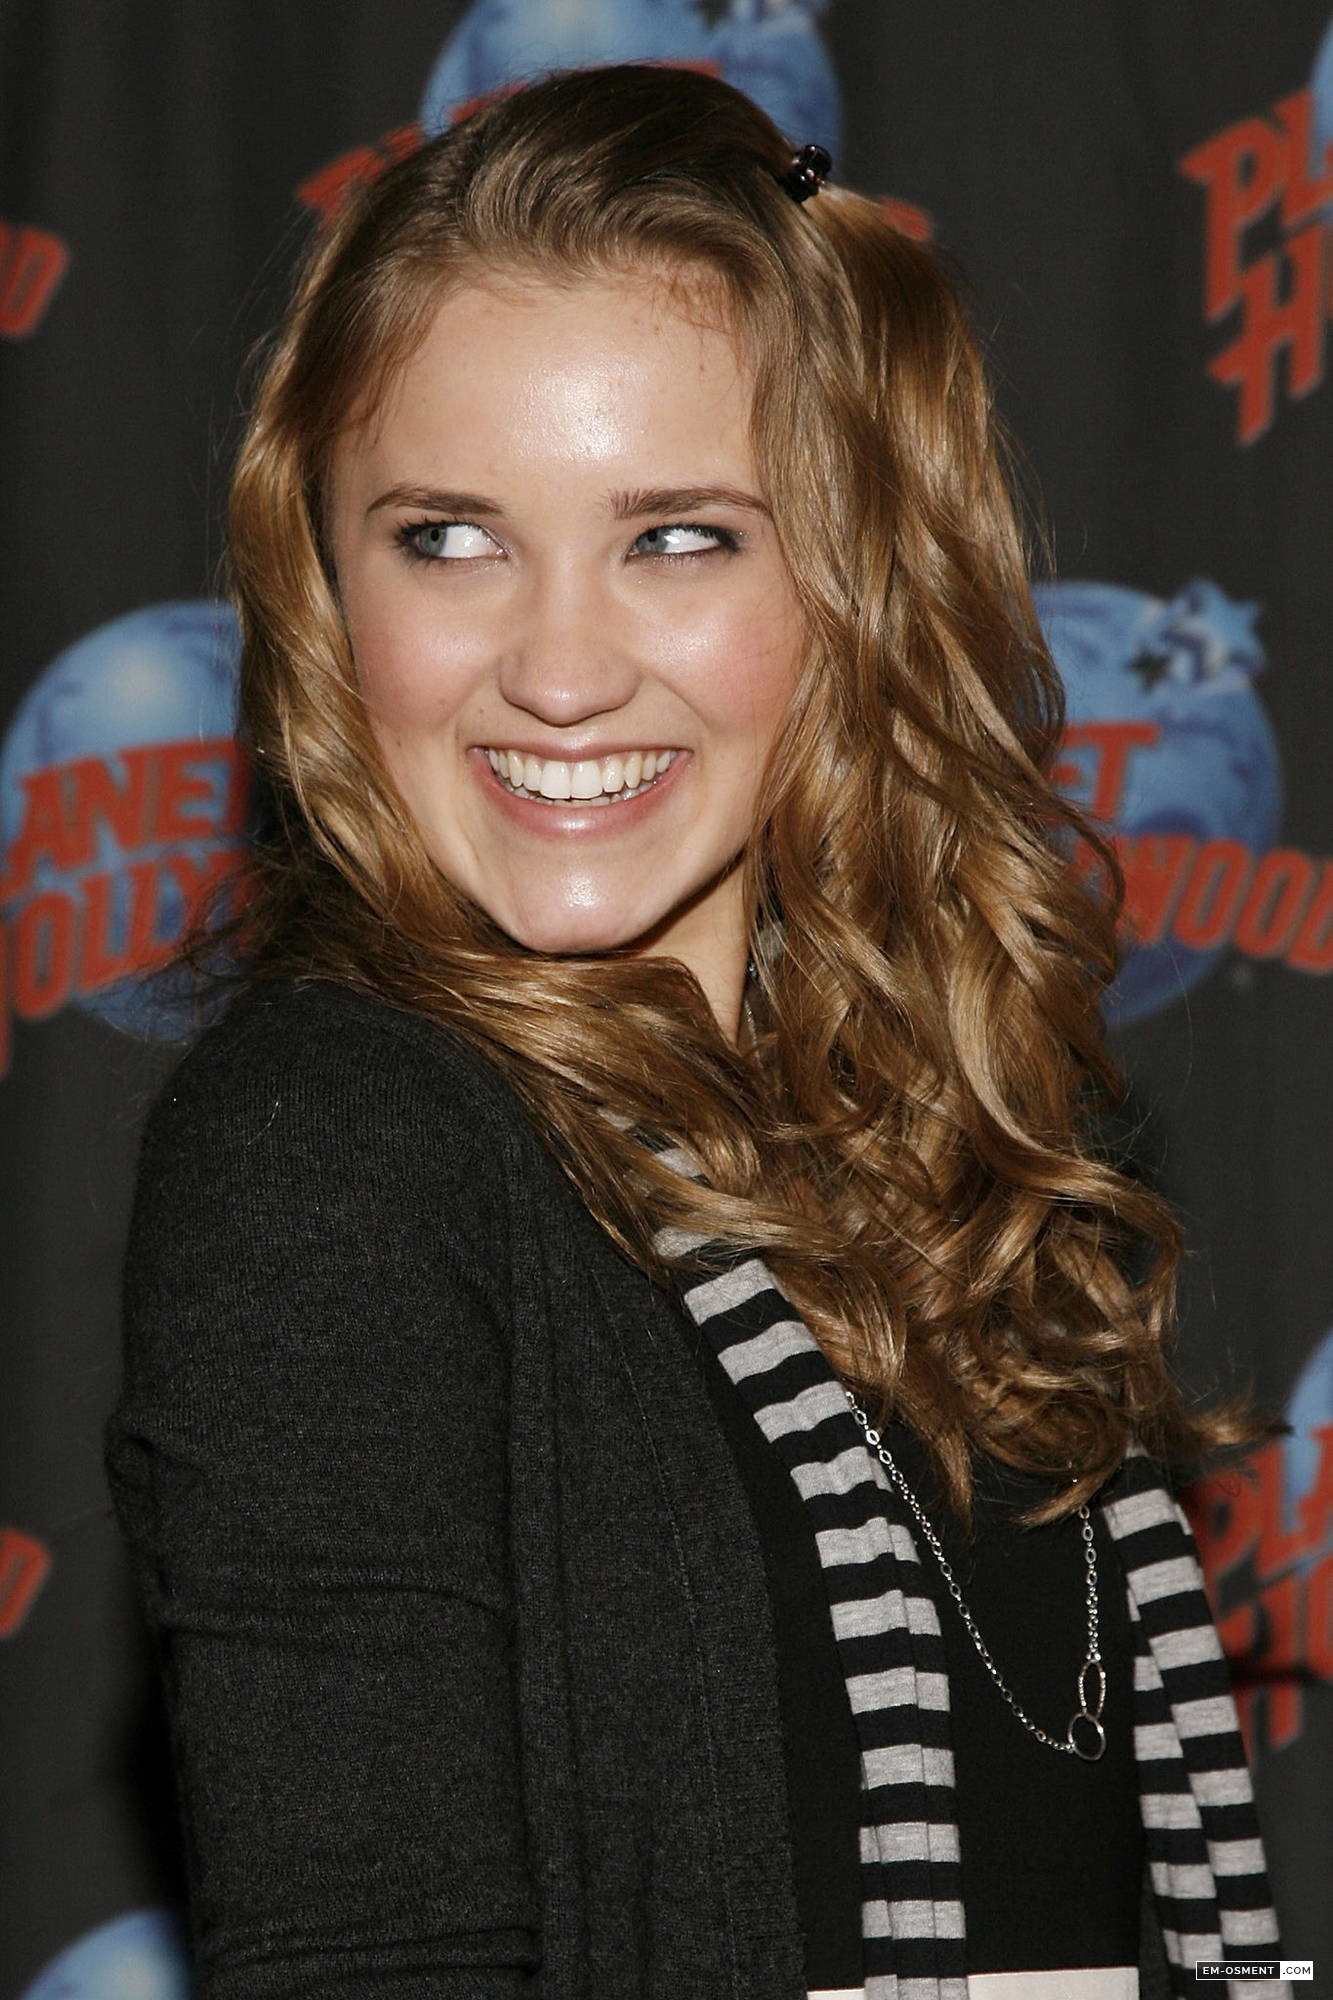 04 07 09 Emily Osment And Lucas Till Visit Planet Hollywood 029 Emily Osment Online Your